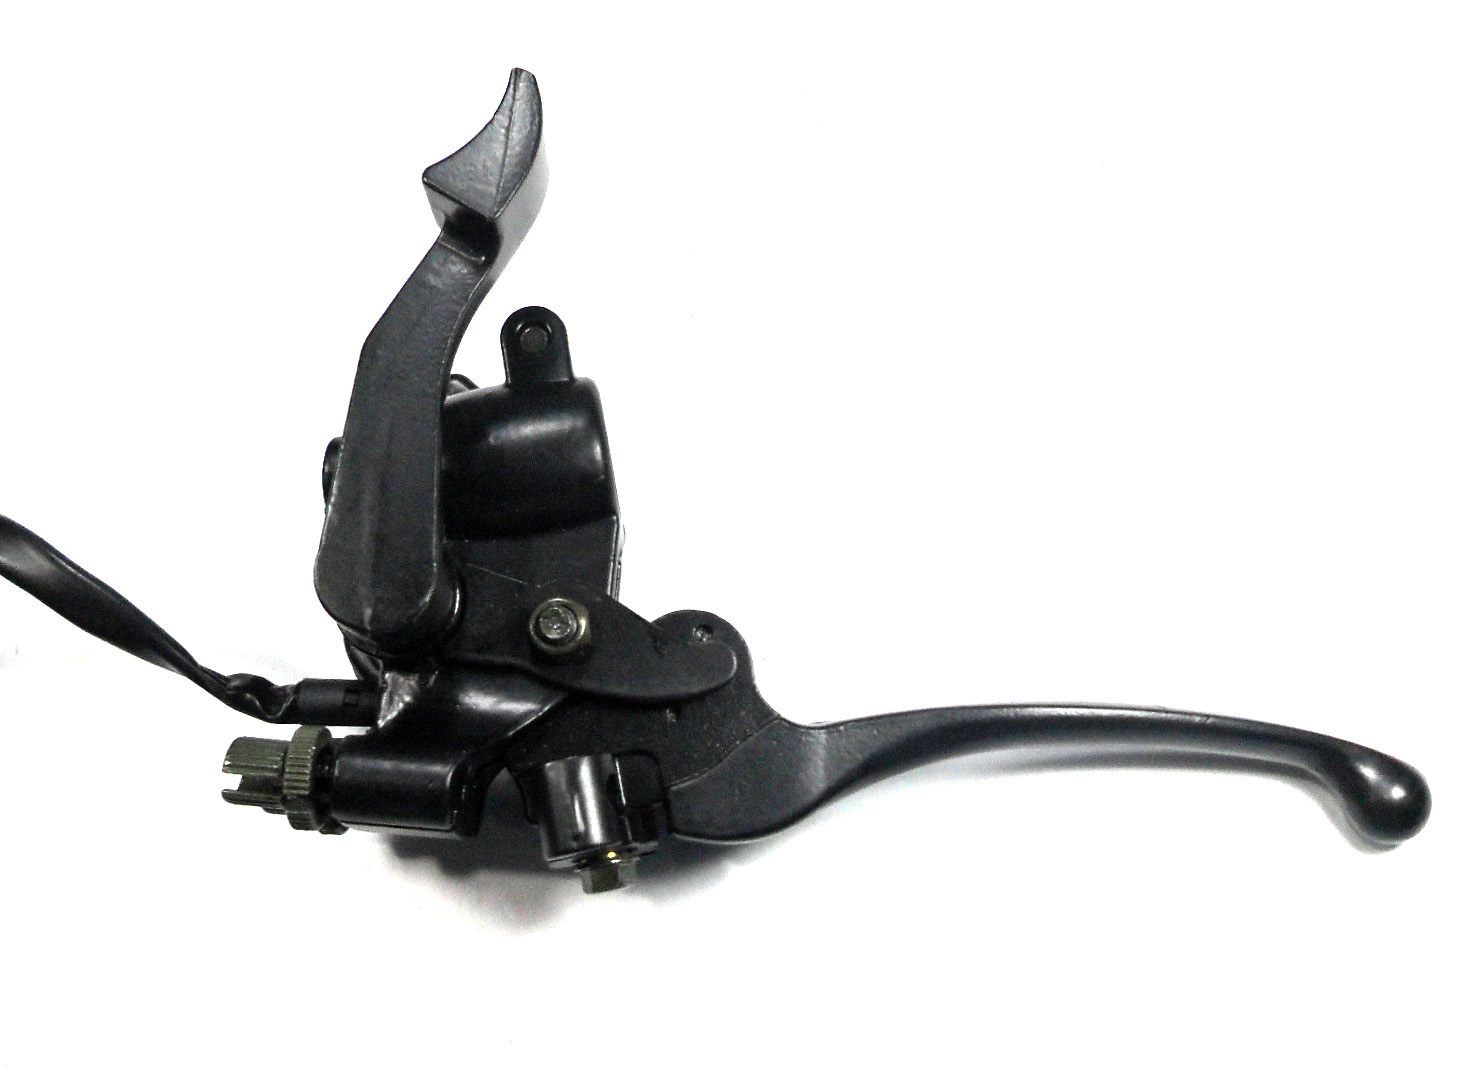 ATV Throttle ASSY Fits Most 50-250cc ATVs with Right Hande Double Front Brake Cables. - Click Image to Close